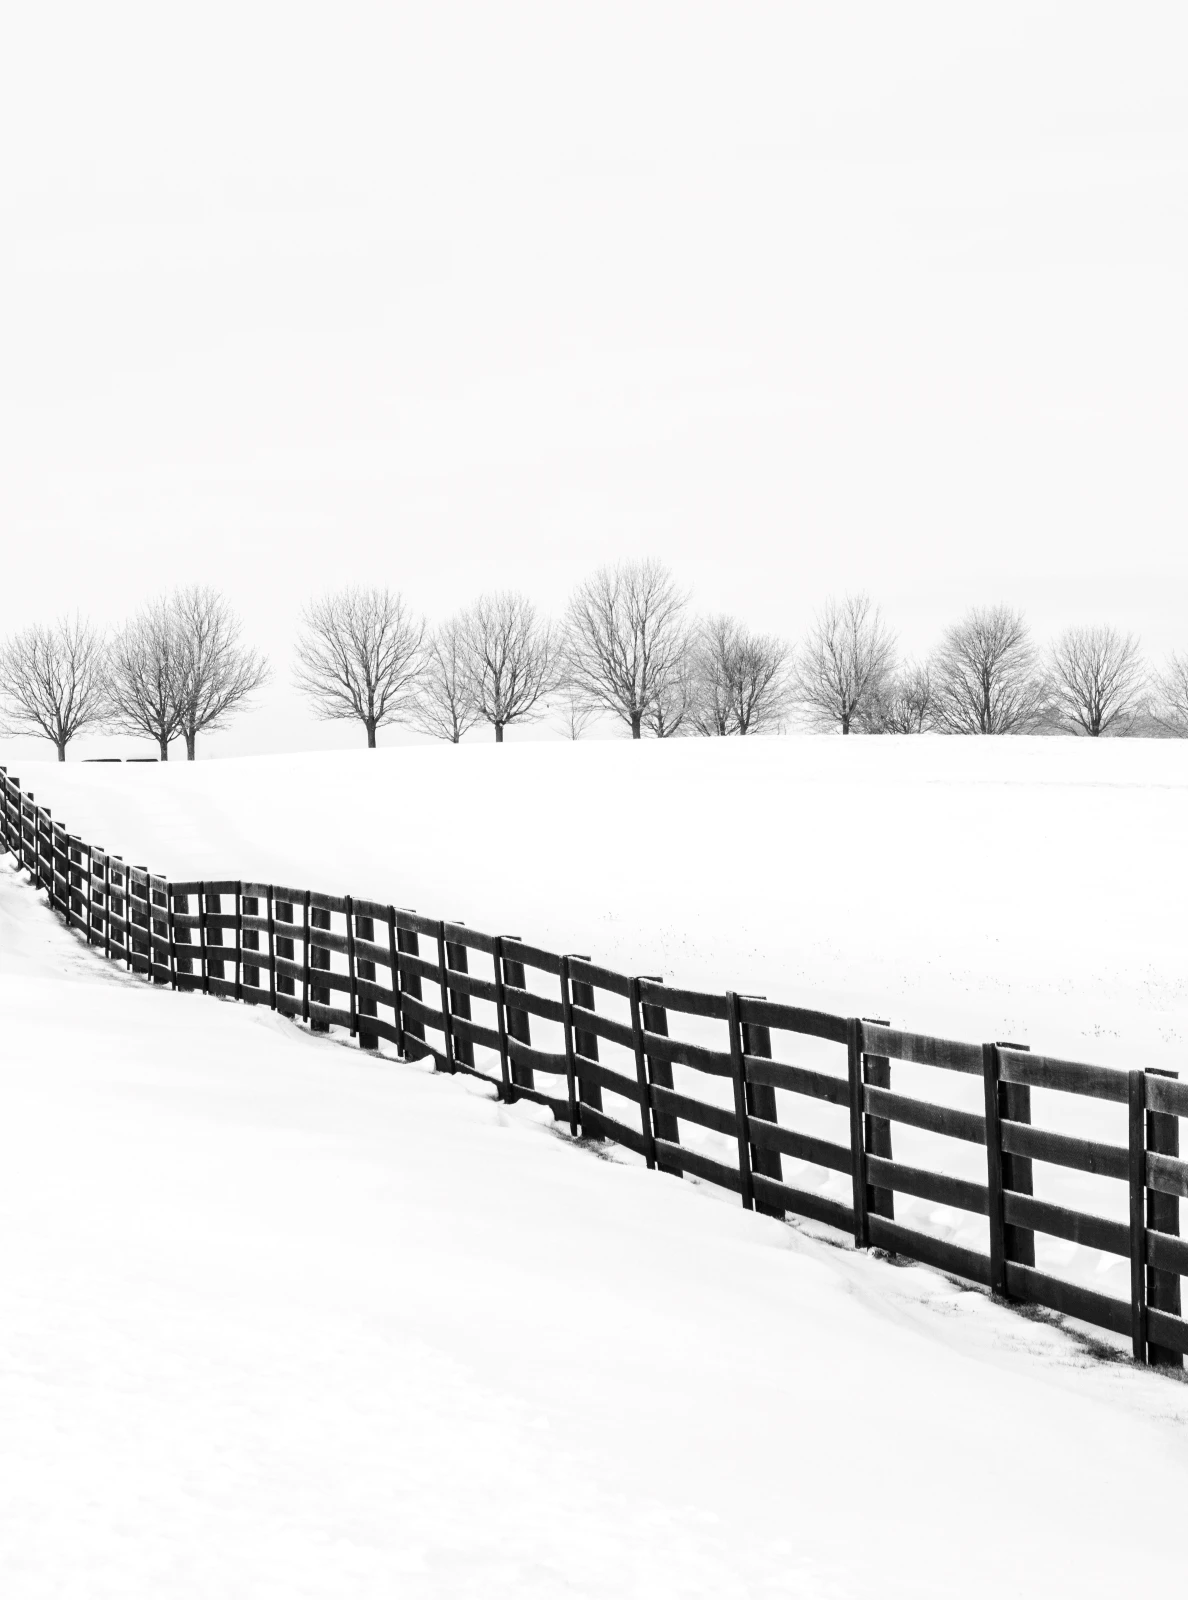 Fence and Trees in Winter, Nobleton, Ontario 